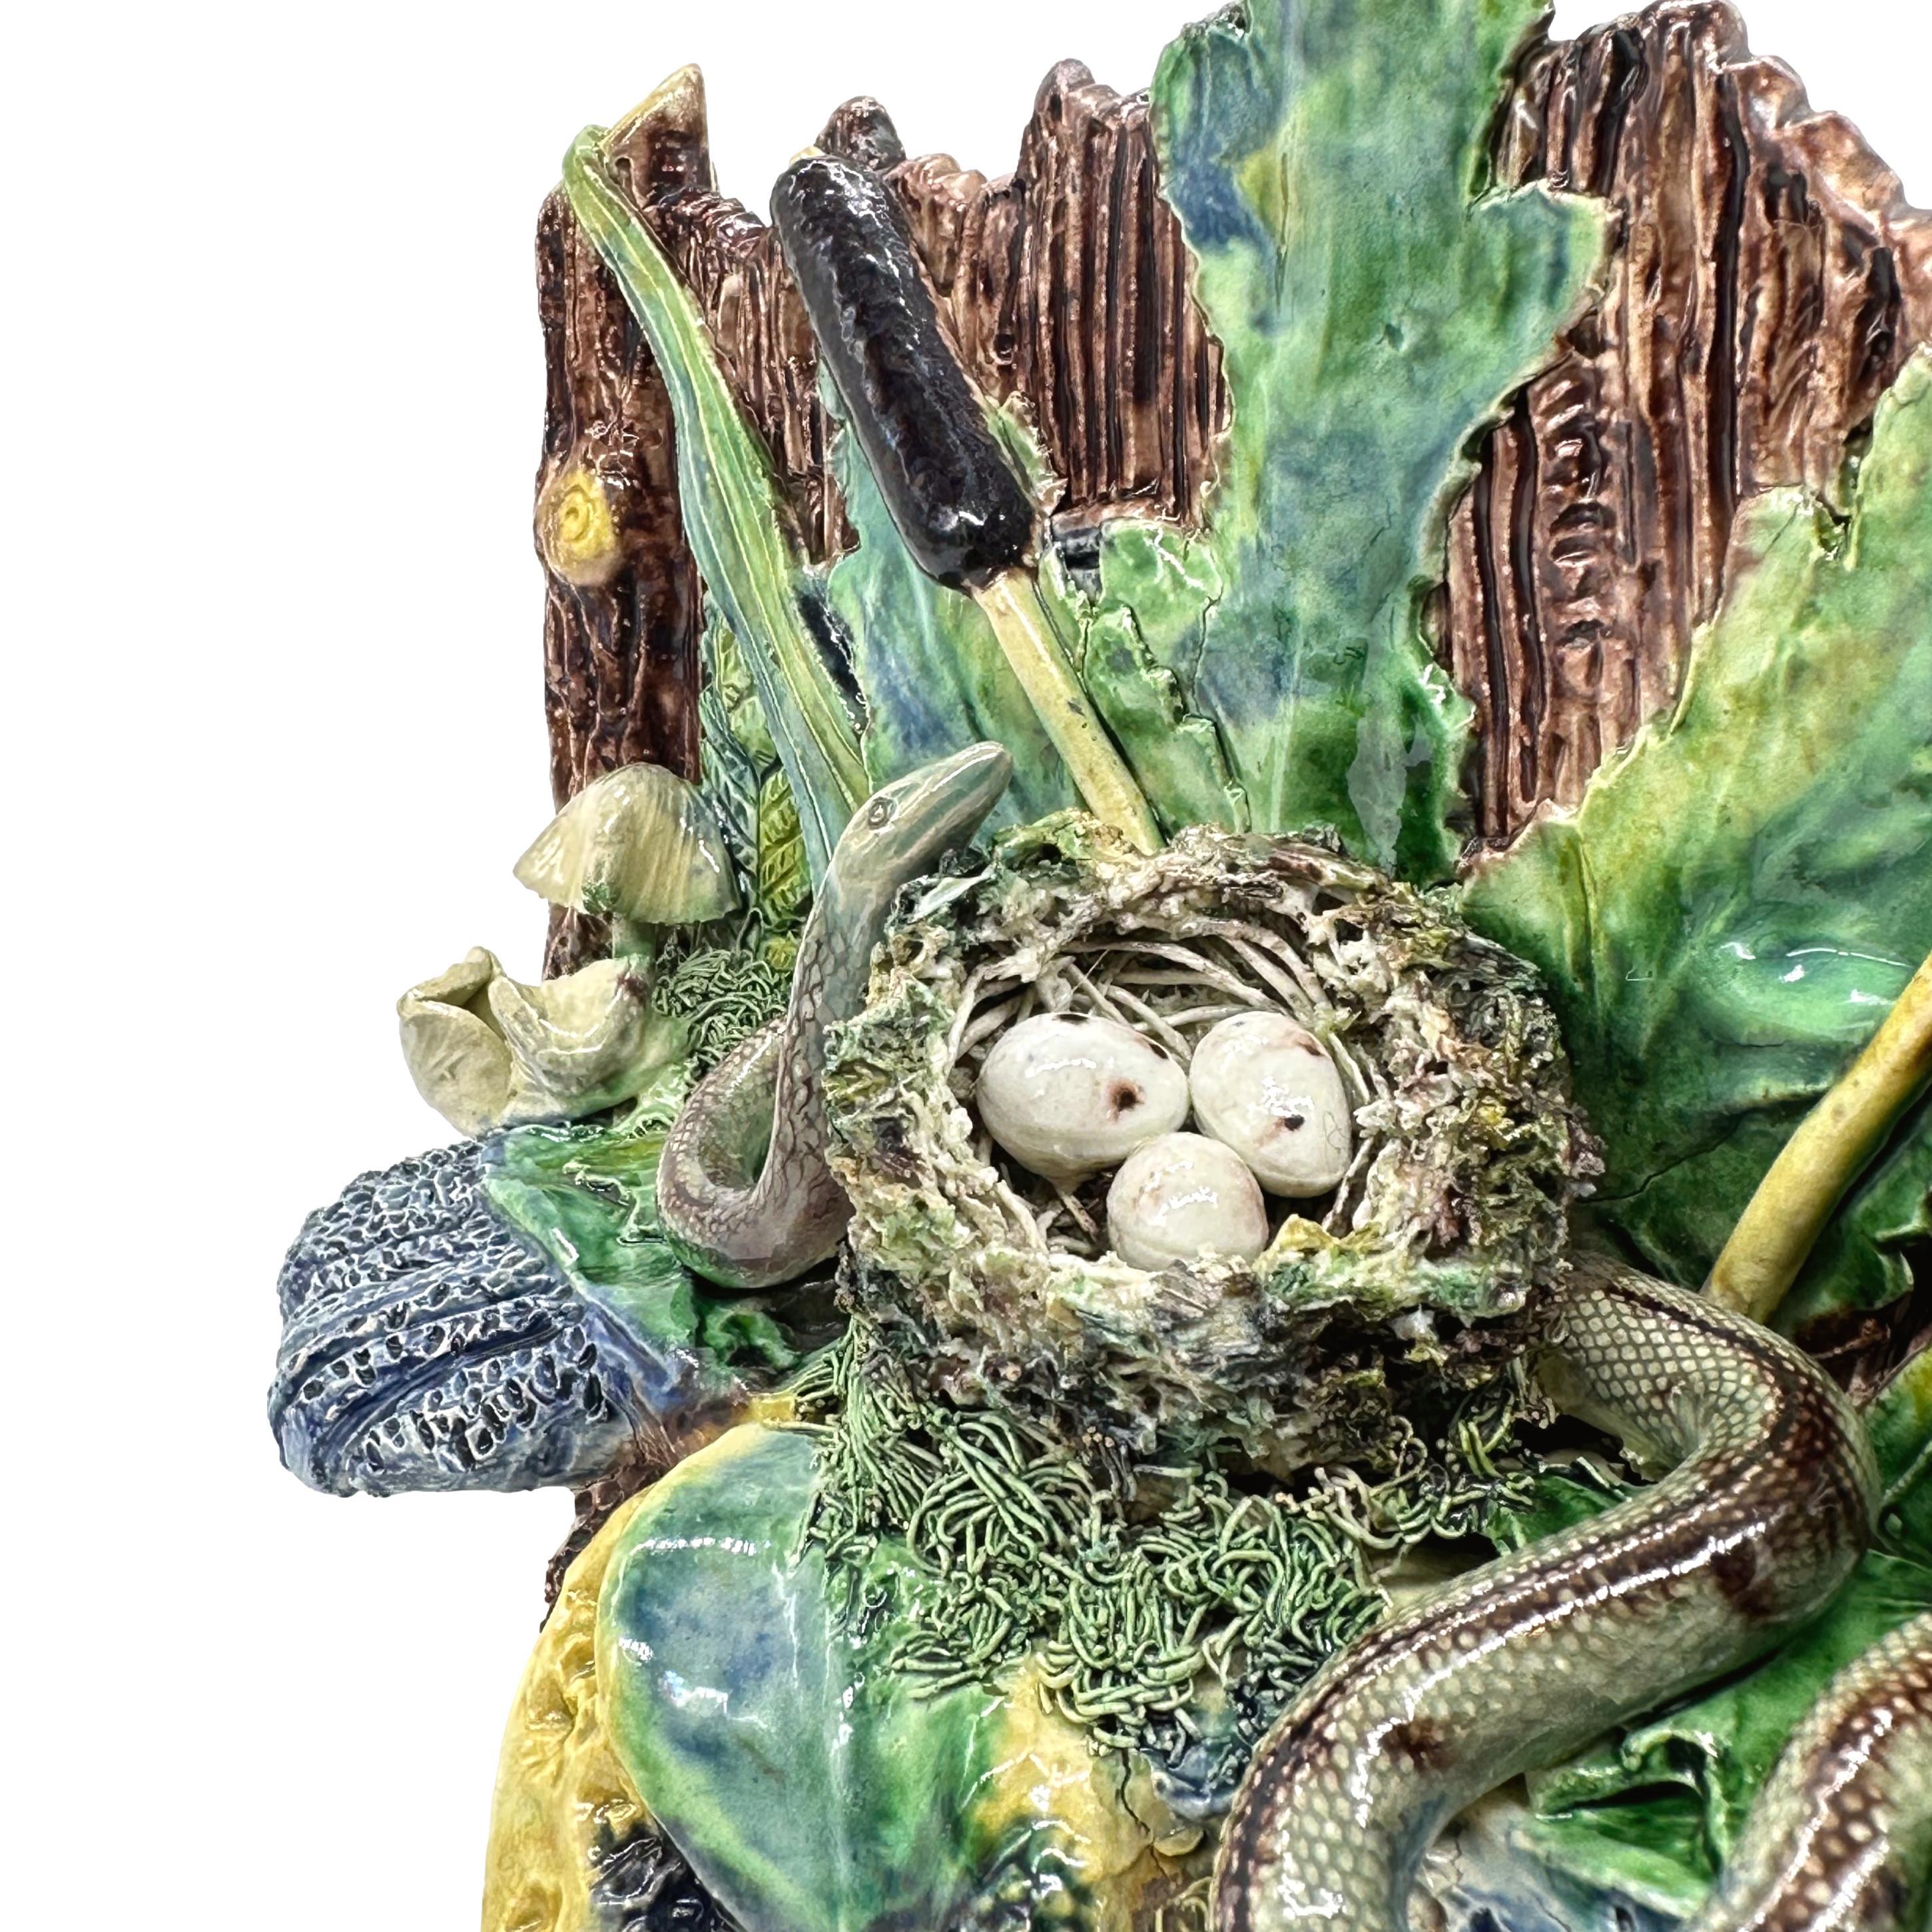 A Palissy Ware Majolica Jardinière, modelled as a rectangular rustic wooden trough with simulated wooden staves and branches, with ferns and green-glazed foliage, bullrushes, and toadstools on a mossy rockwork base, surmounted by a bird's nest of